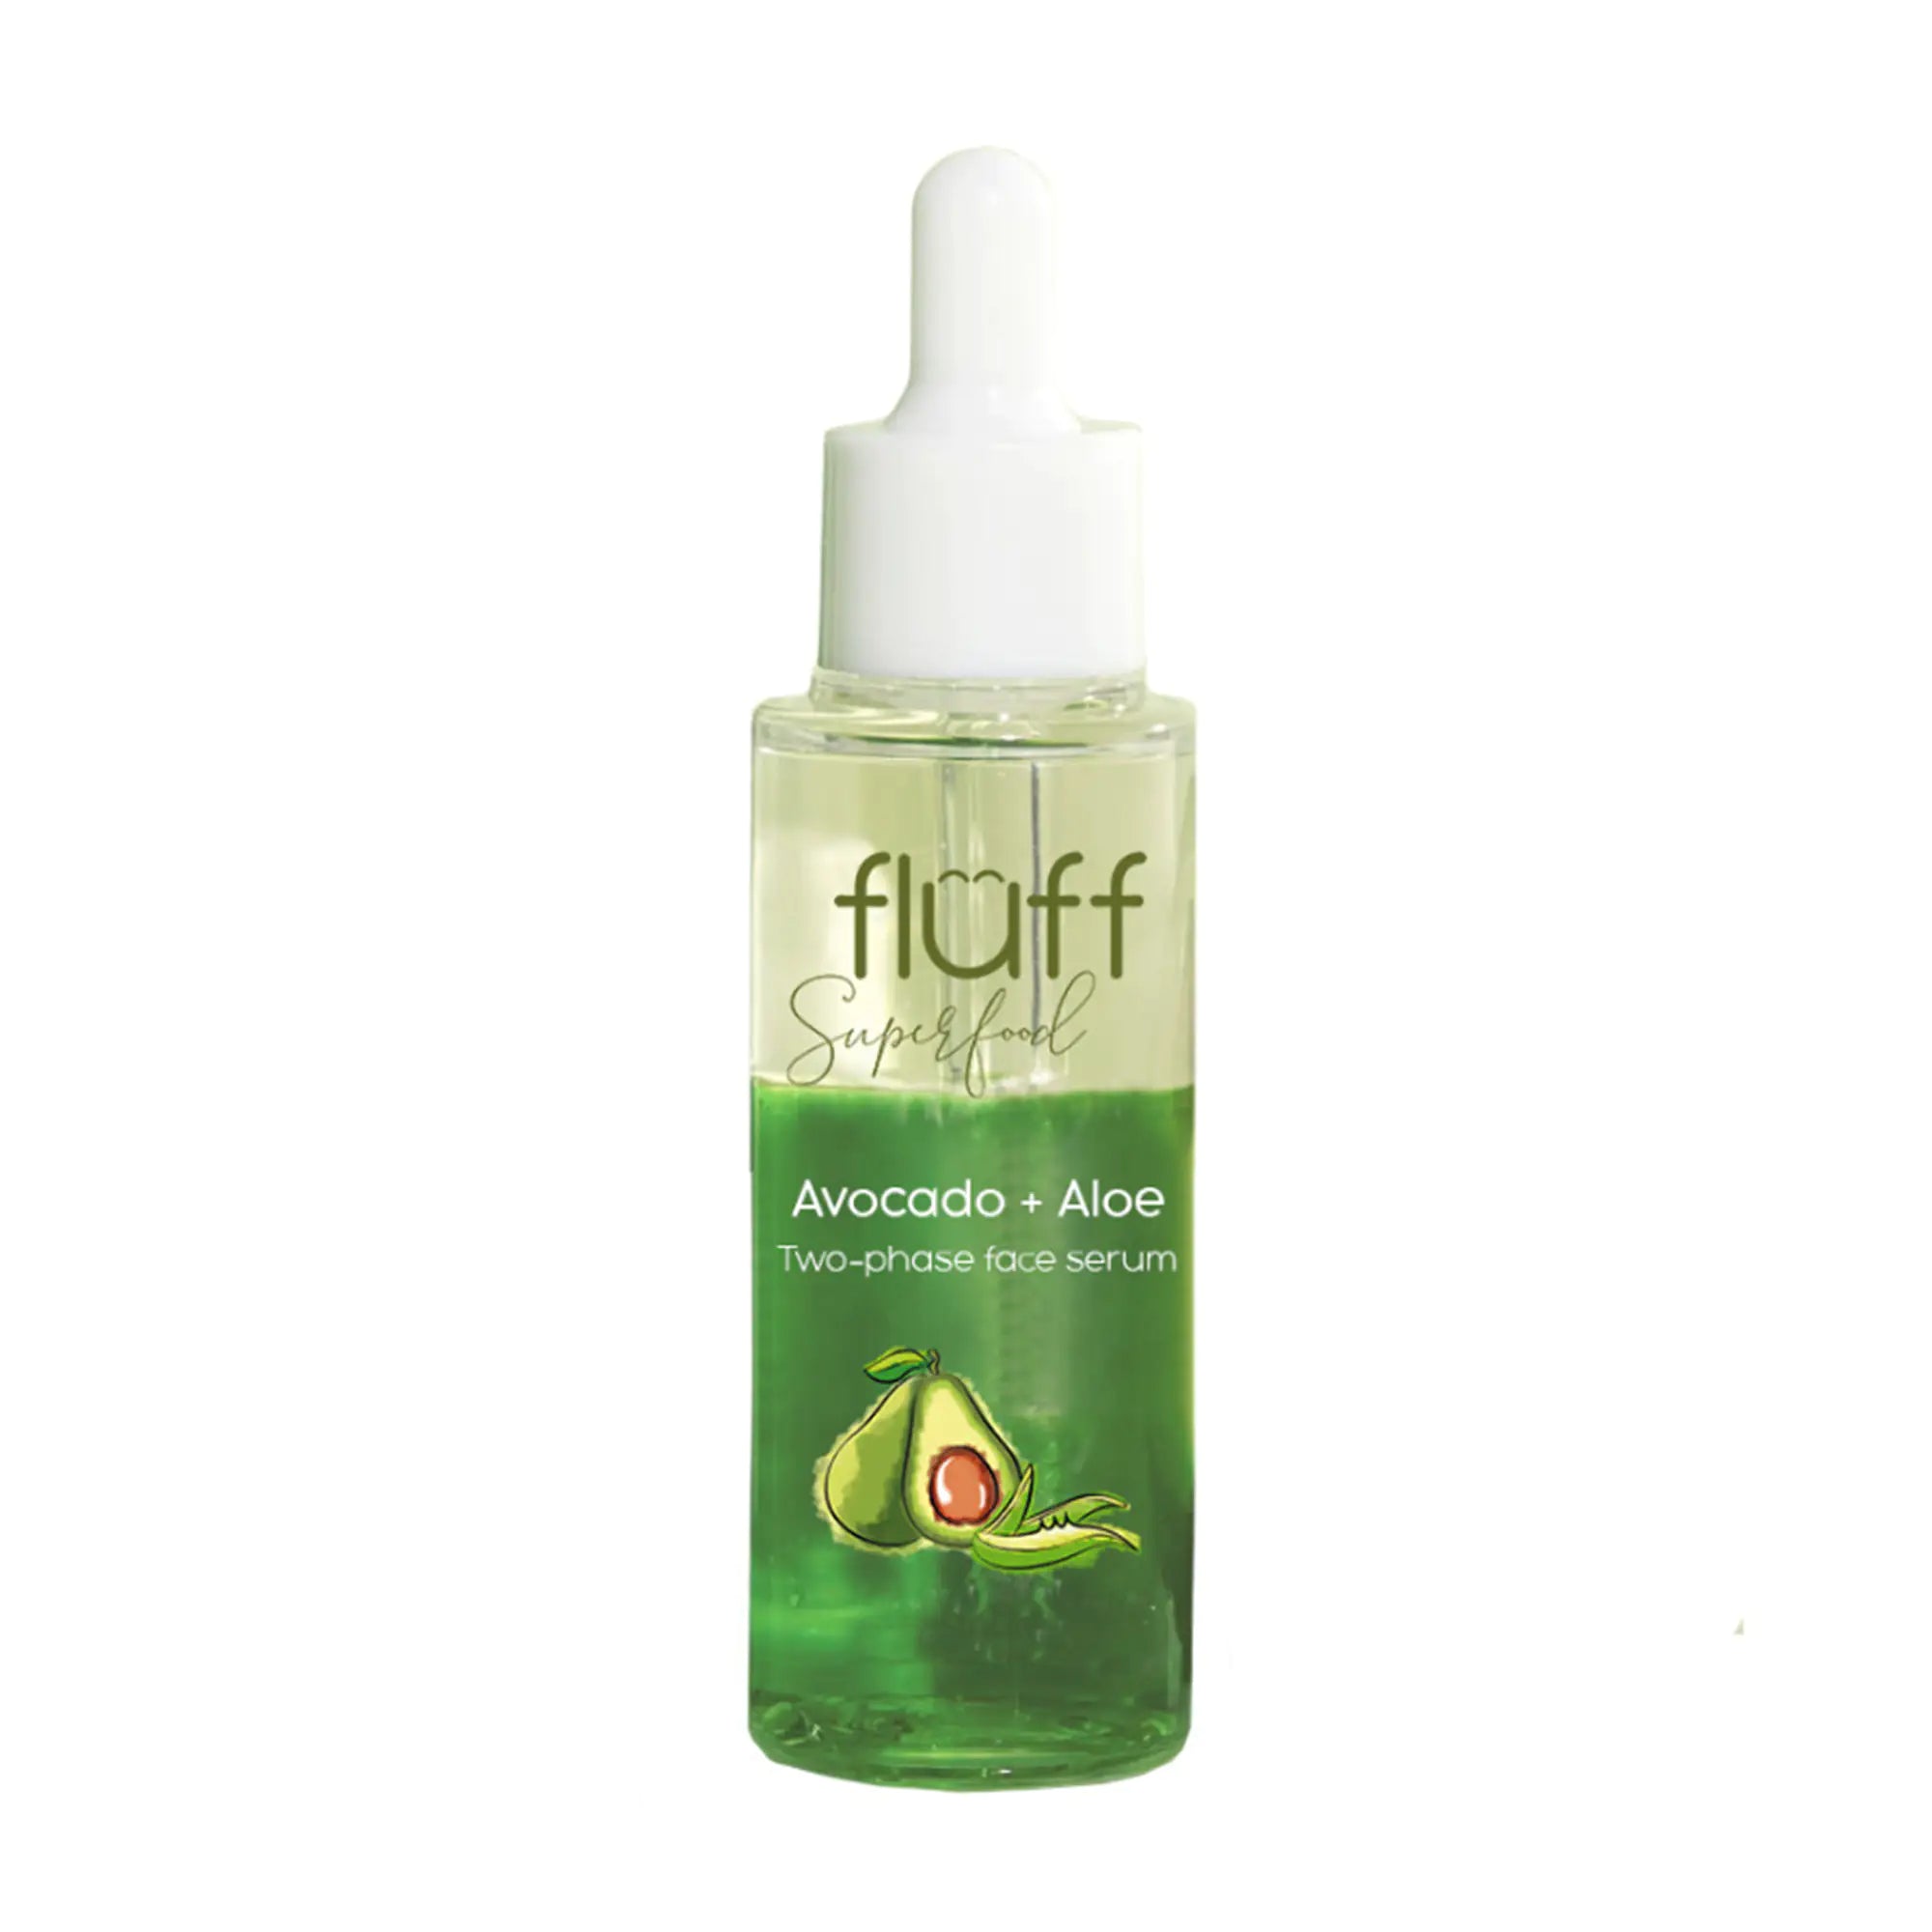 Fluff Aloe and Avocado Booster / Two-phase Face Serum, 40ml